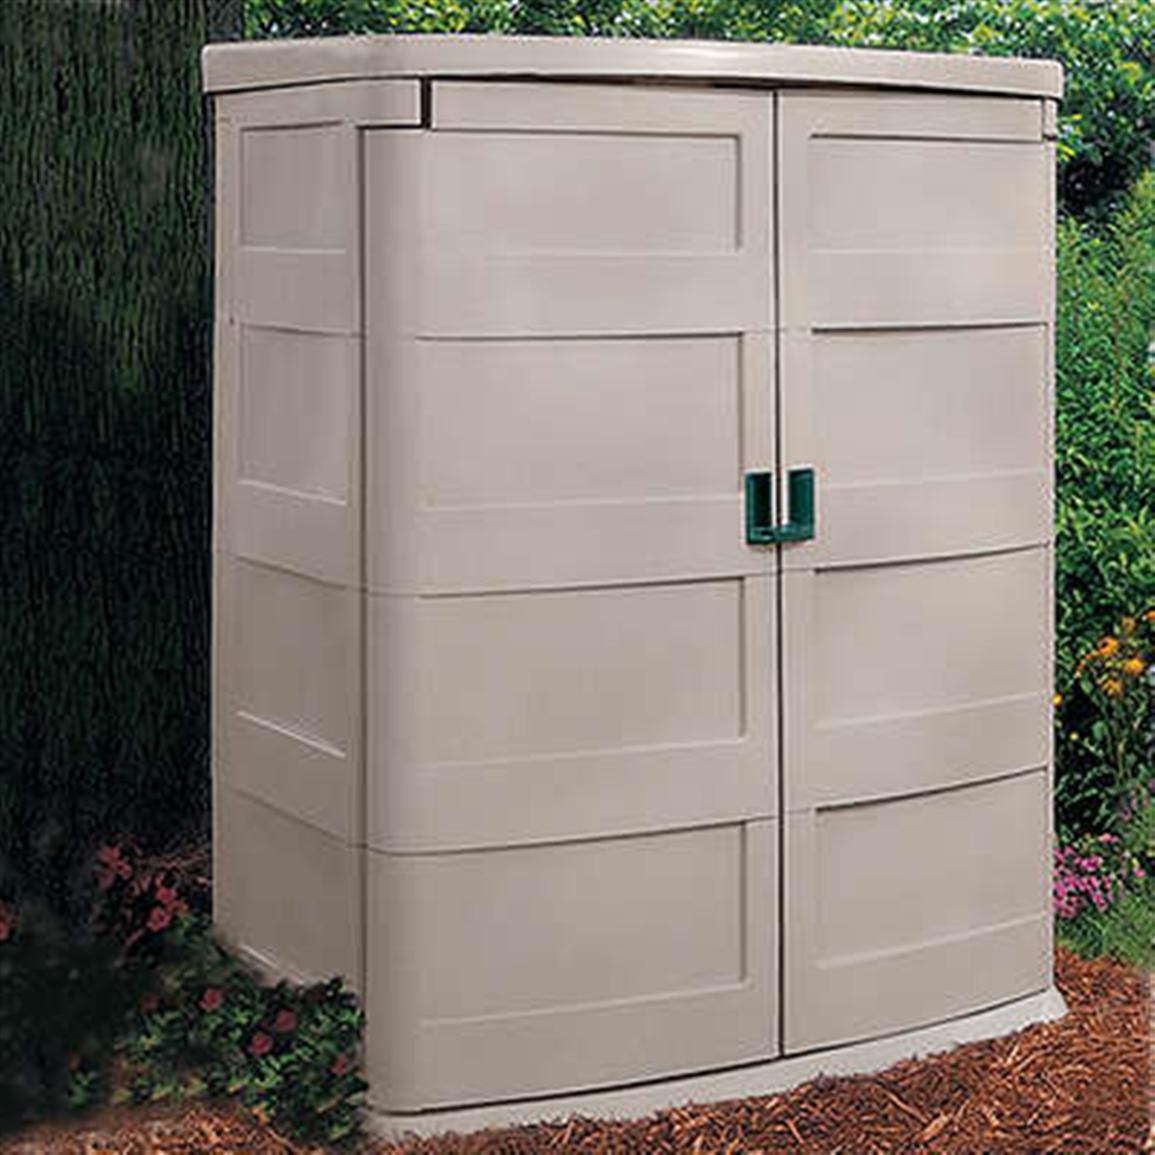 Suncast® Vertical Garden Shed - 138476, Patio Storage at 